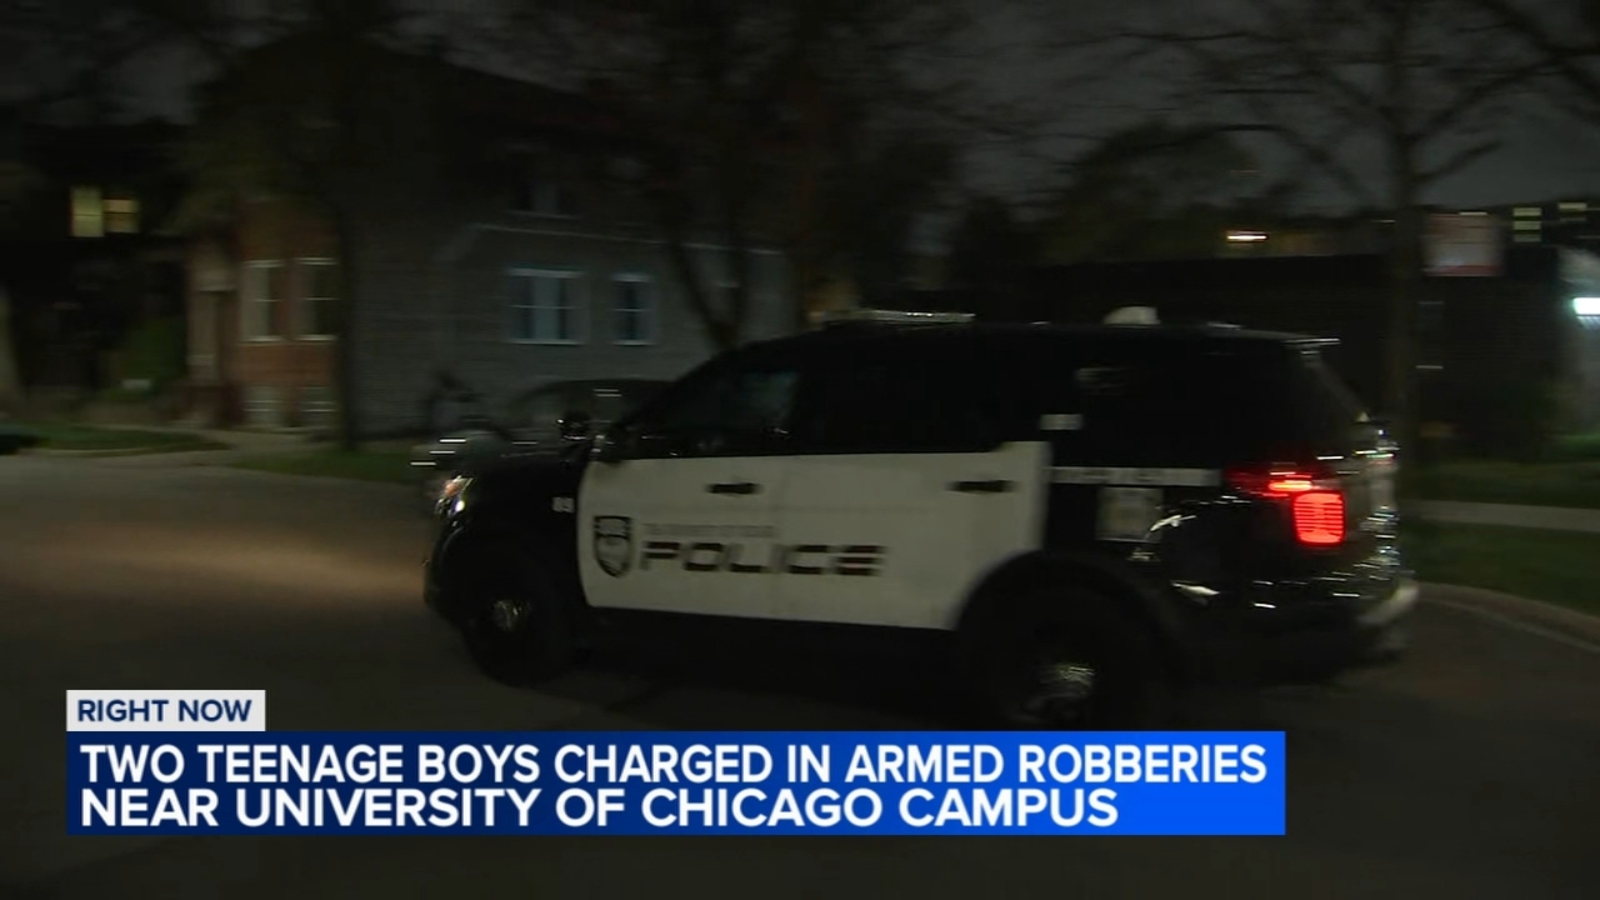 UChicago robbery: 2 teen boys charged in connection with 3 University of Chicago robbery incidents near Hyde Park campus [Video]